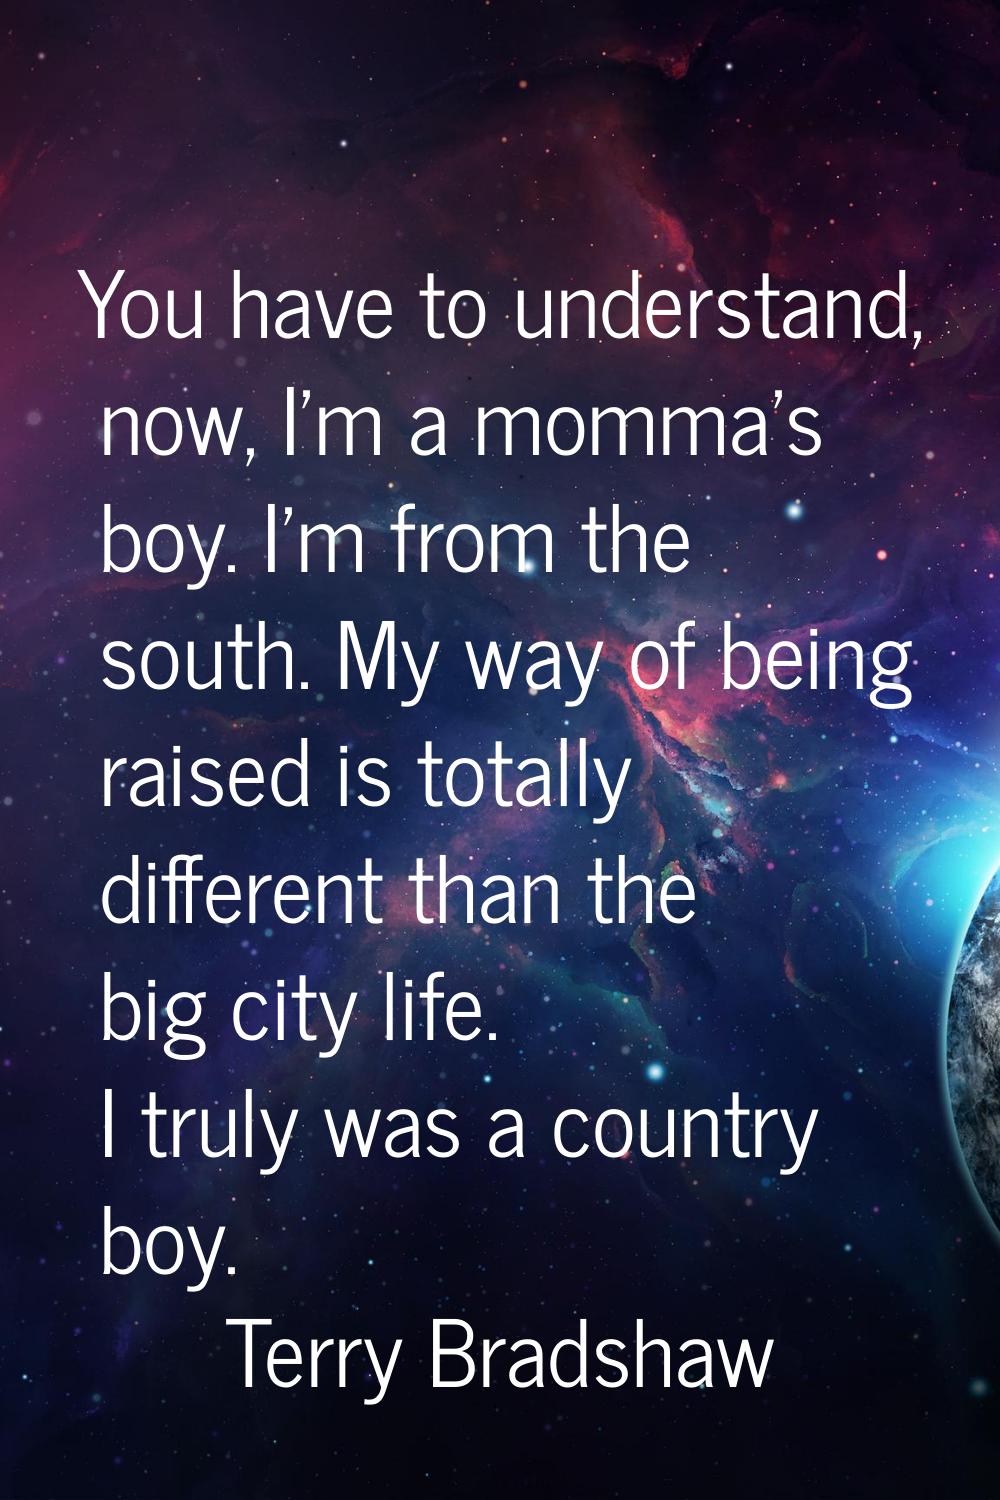 You have to understand, now, I'm a momma's boy. I'm from the south. My way of being raised is total